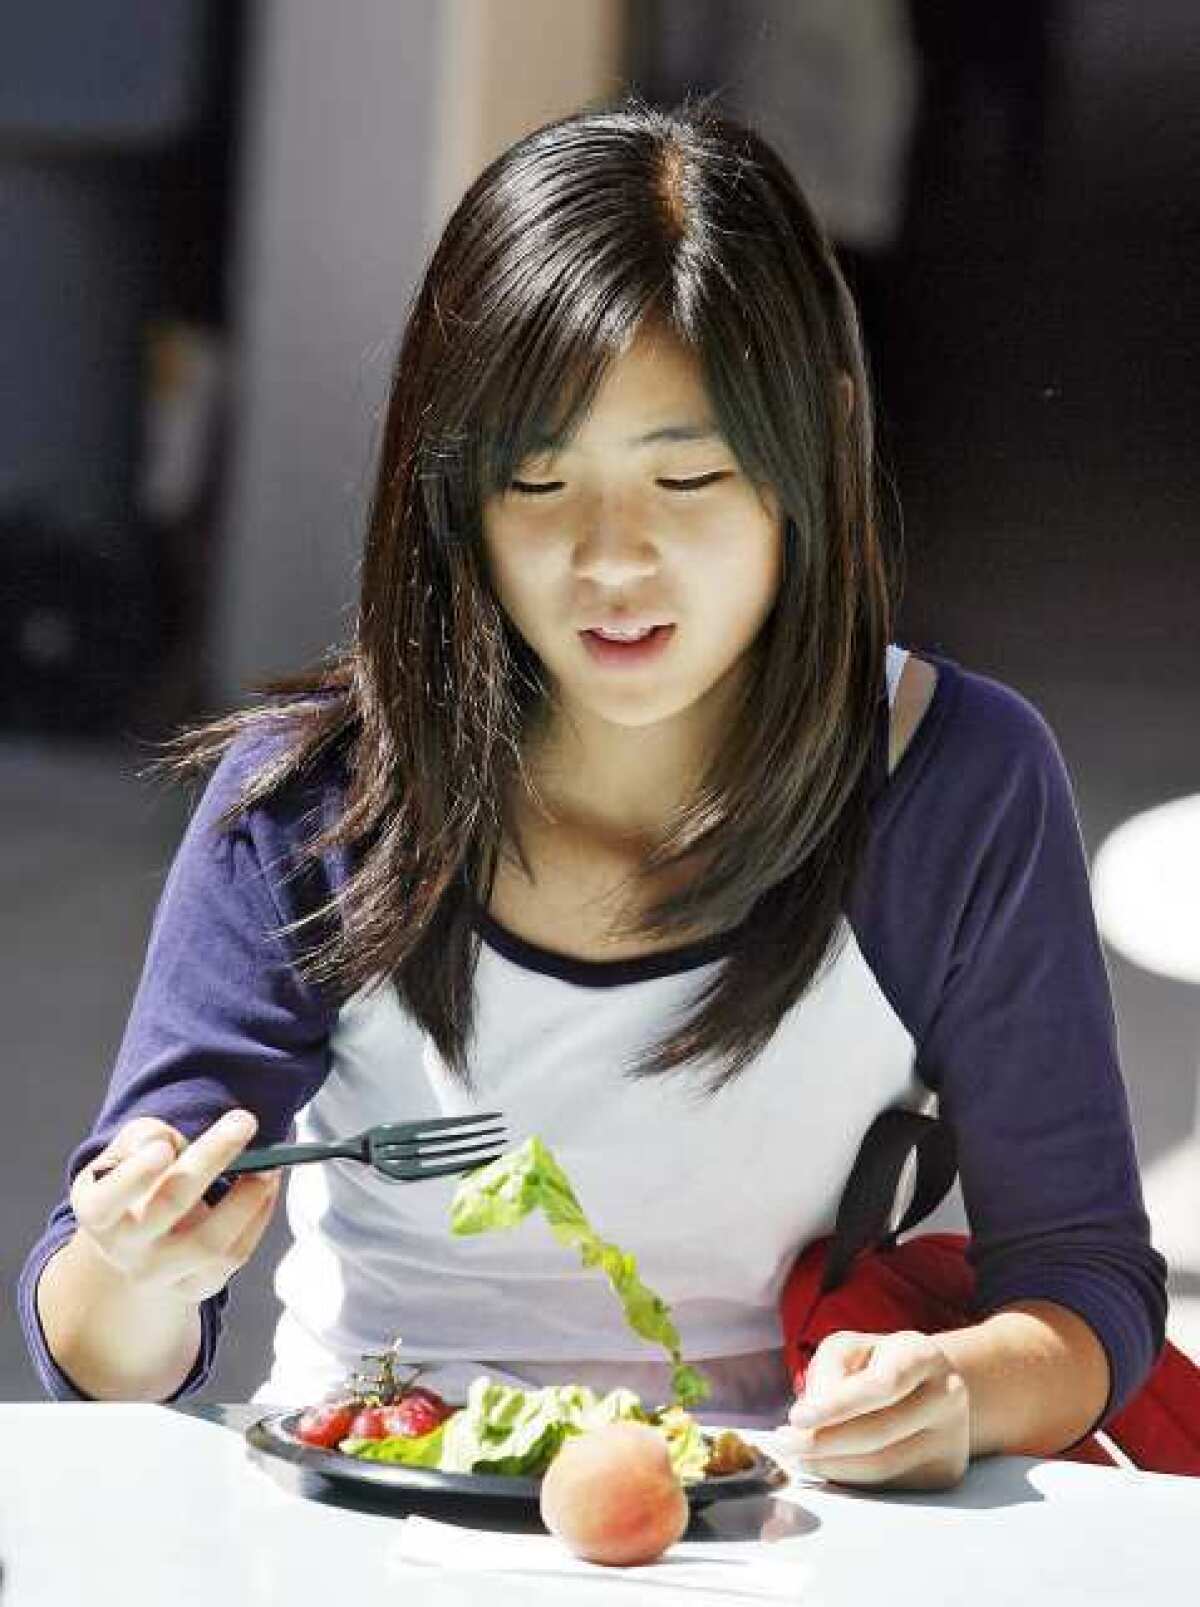 Nika Kim, 13, lifts a piece of lettuce, which is considered a vegetable, during lunchtime at Rosemont Middle School in La Crescenta. Federal guidelines for school lunches mandates a healthier menu, including whole grain pastas, low fat cheese, and every student must take one-half cup of fruit or vegetables per day.